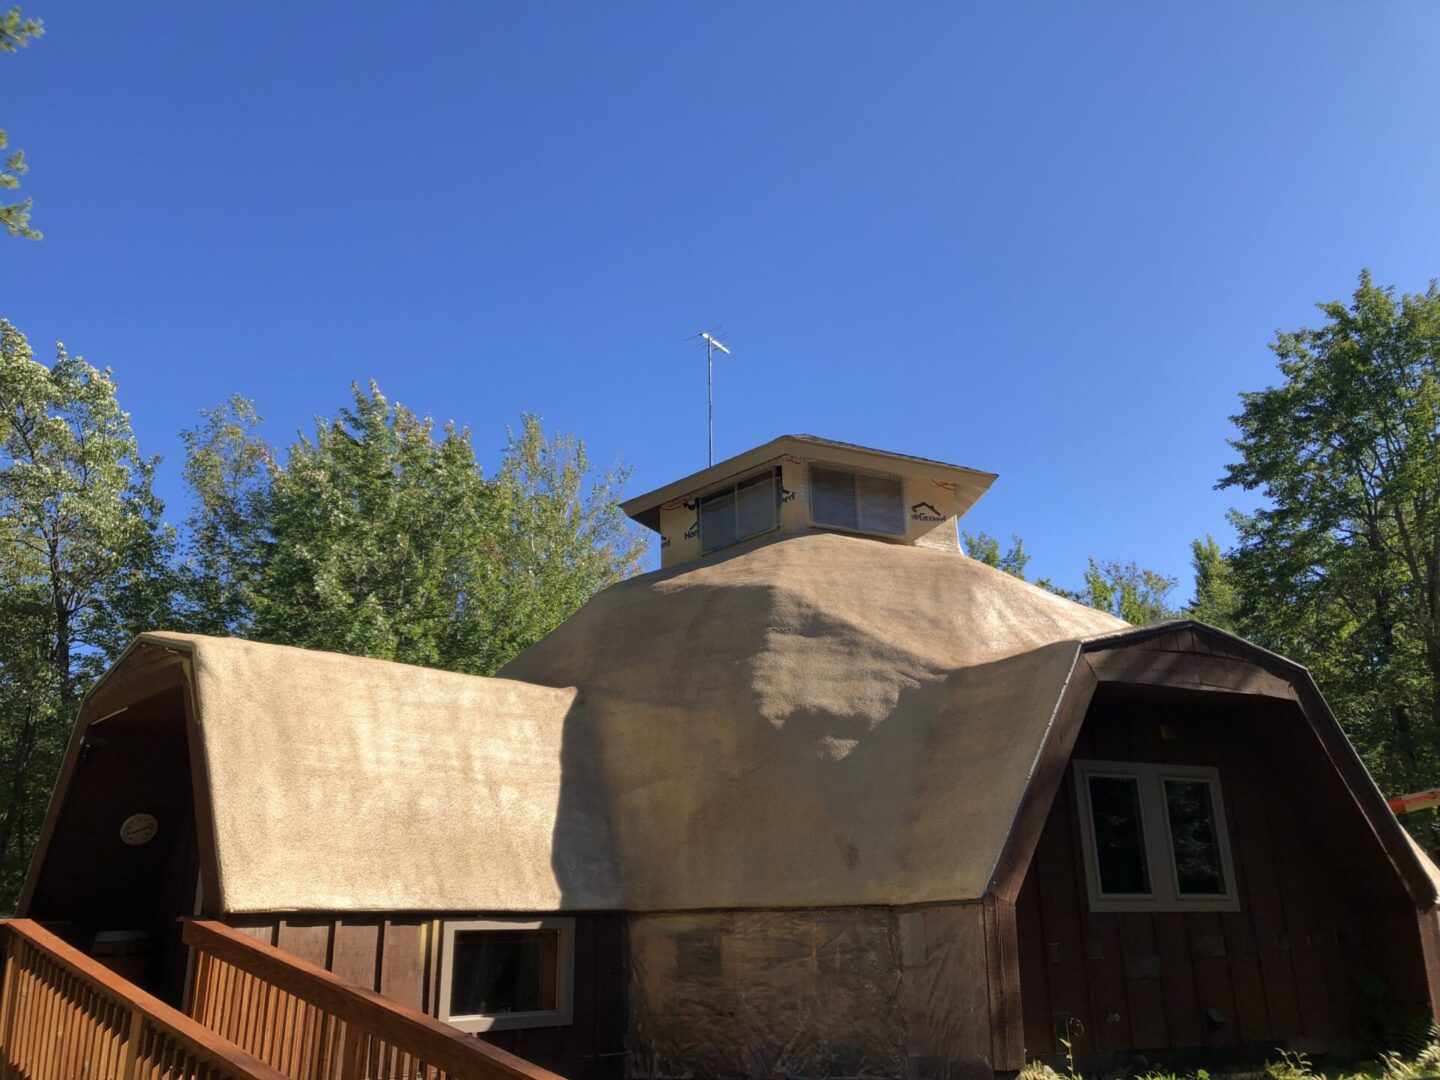 domed roof ceiling for better insulation seen in side view